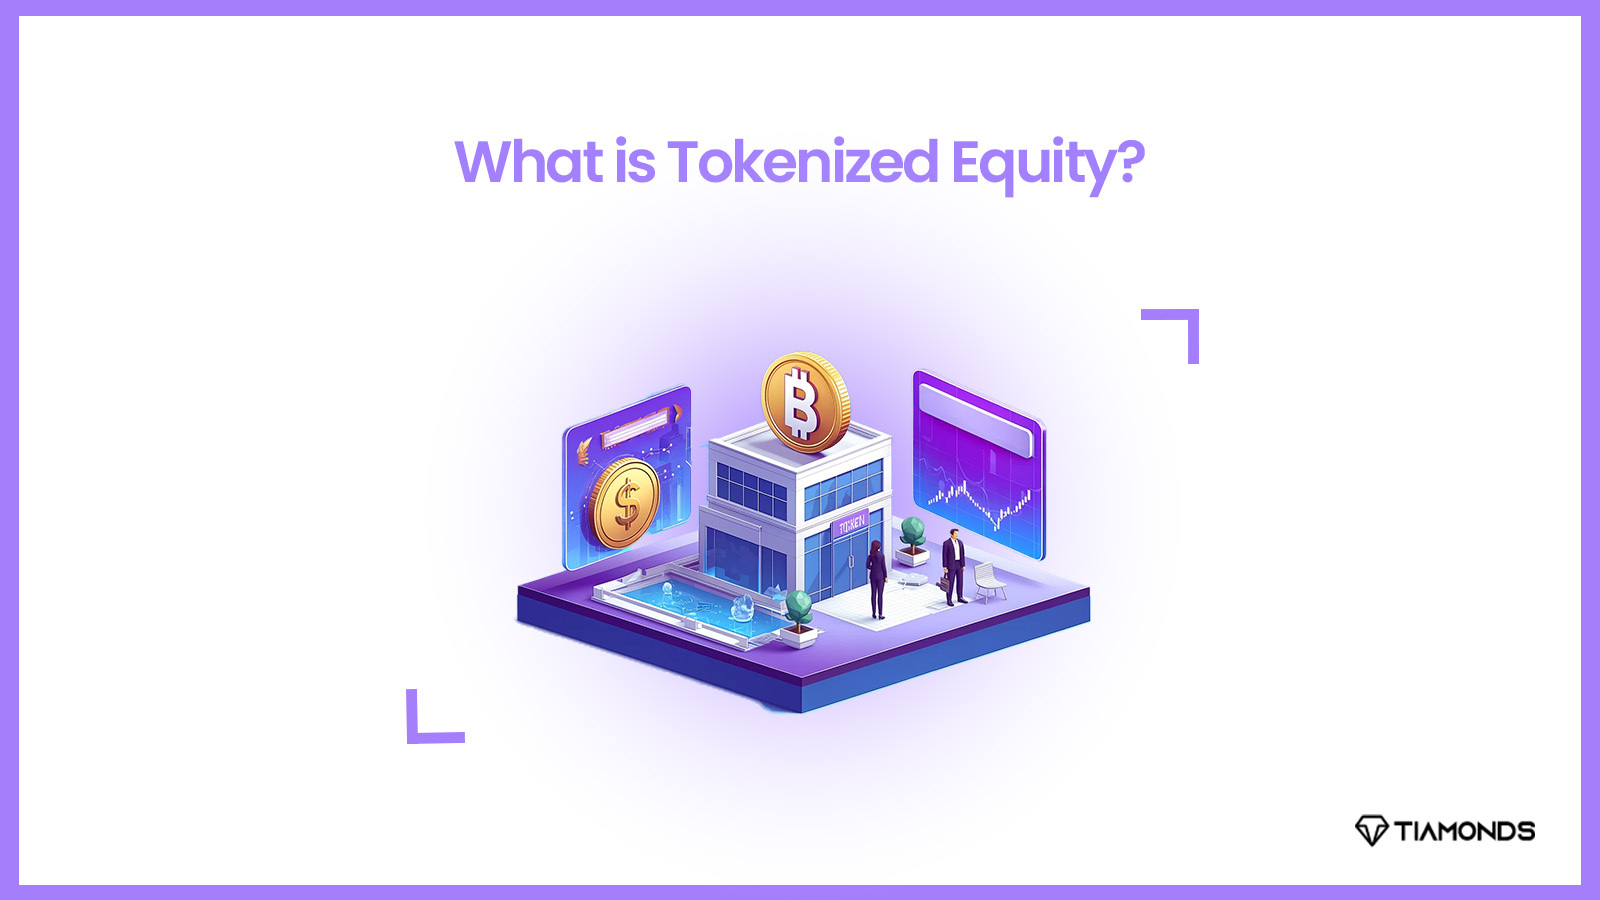 What is Tokenized Equity